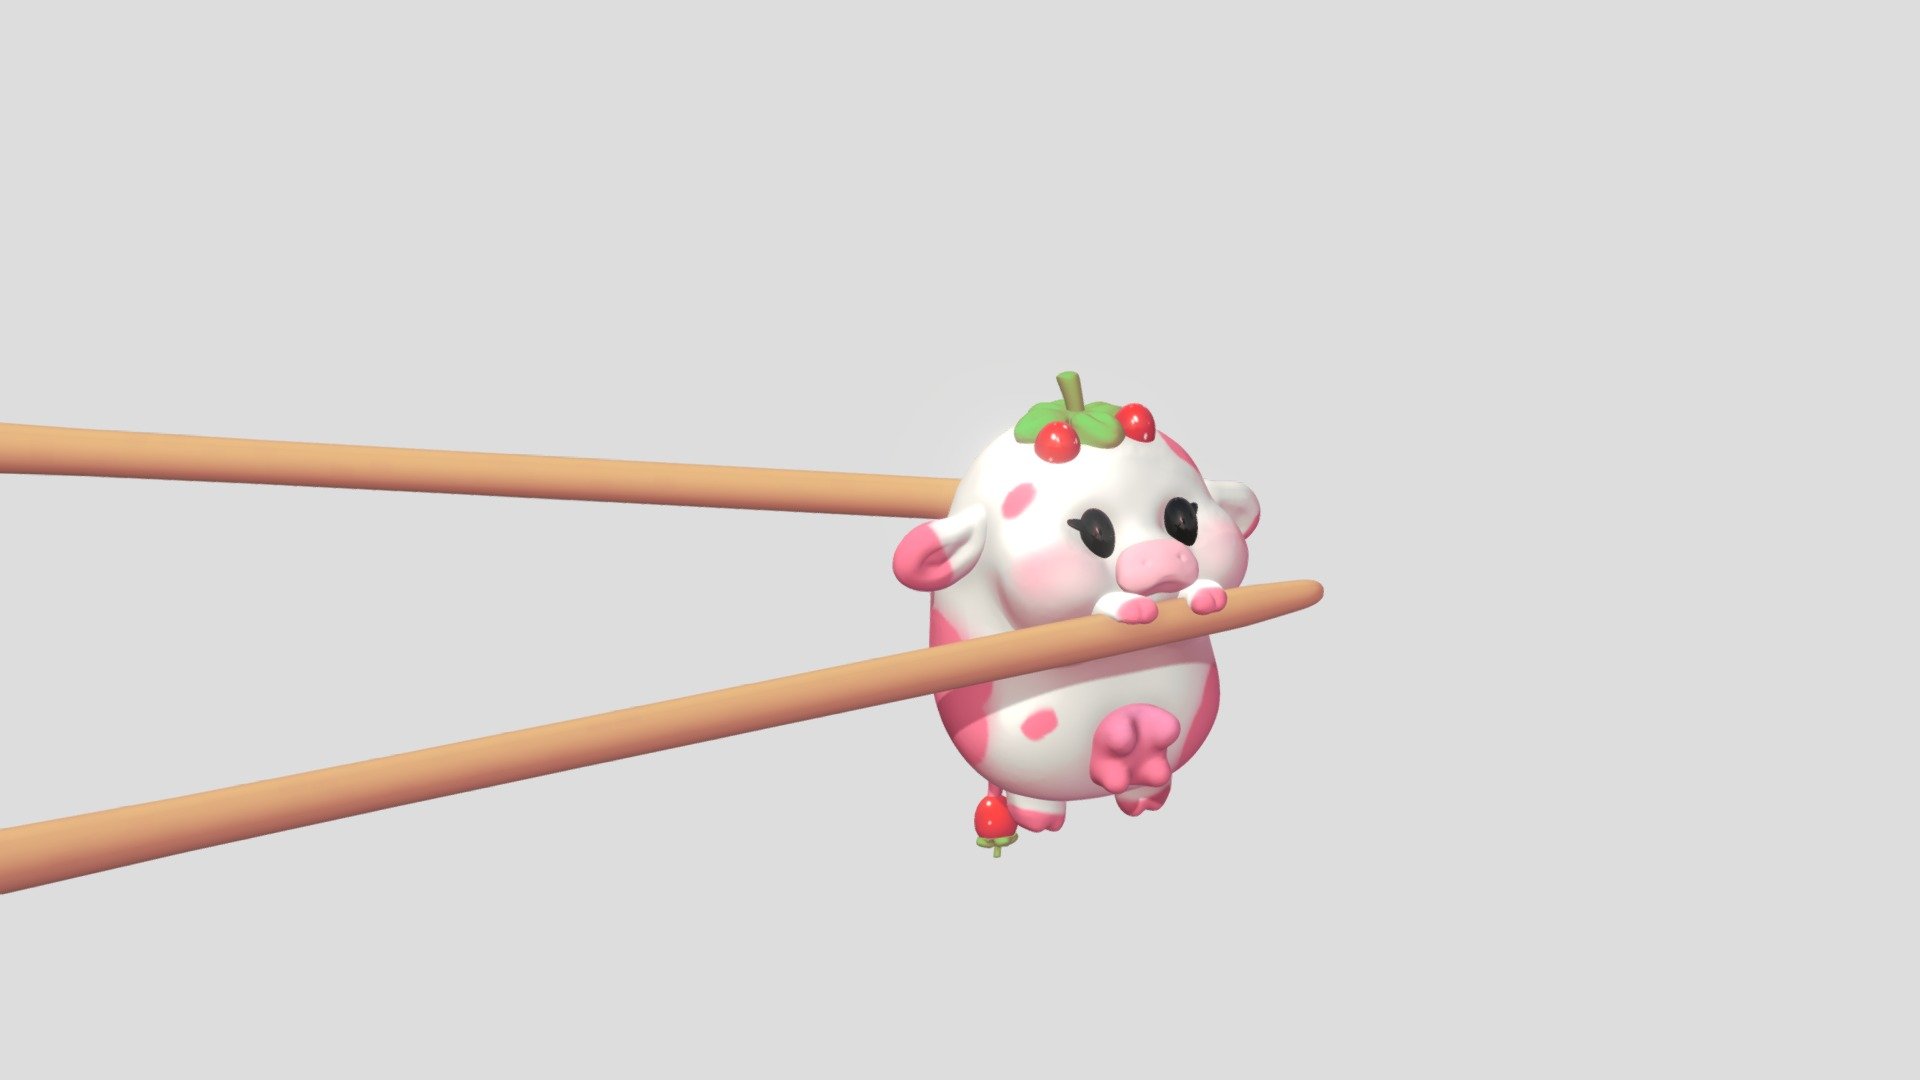 Katie Animal Crossing on Twitter Made a Strawberry Cow Pillow Pet themed  Desktop Wallpaper if anyone wants to use it strawberrycow pillowpets  strawberry cottagecore cow wallpaper httpstcos7o9tKvXcn  Twitter